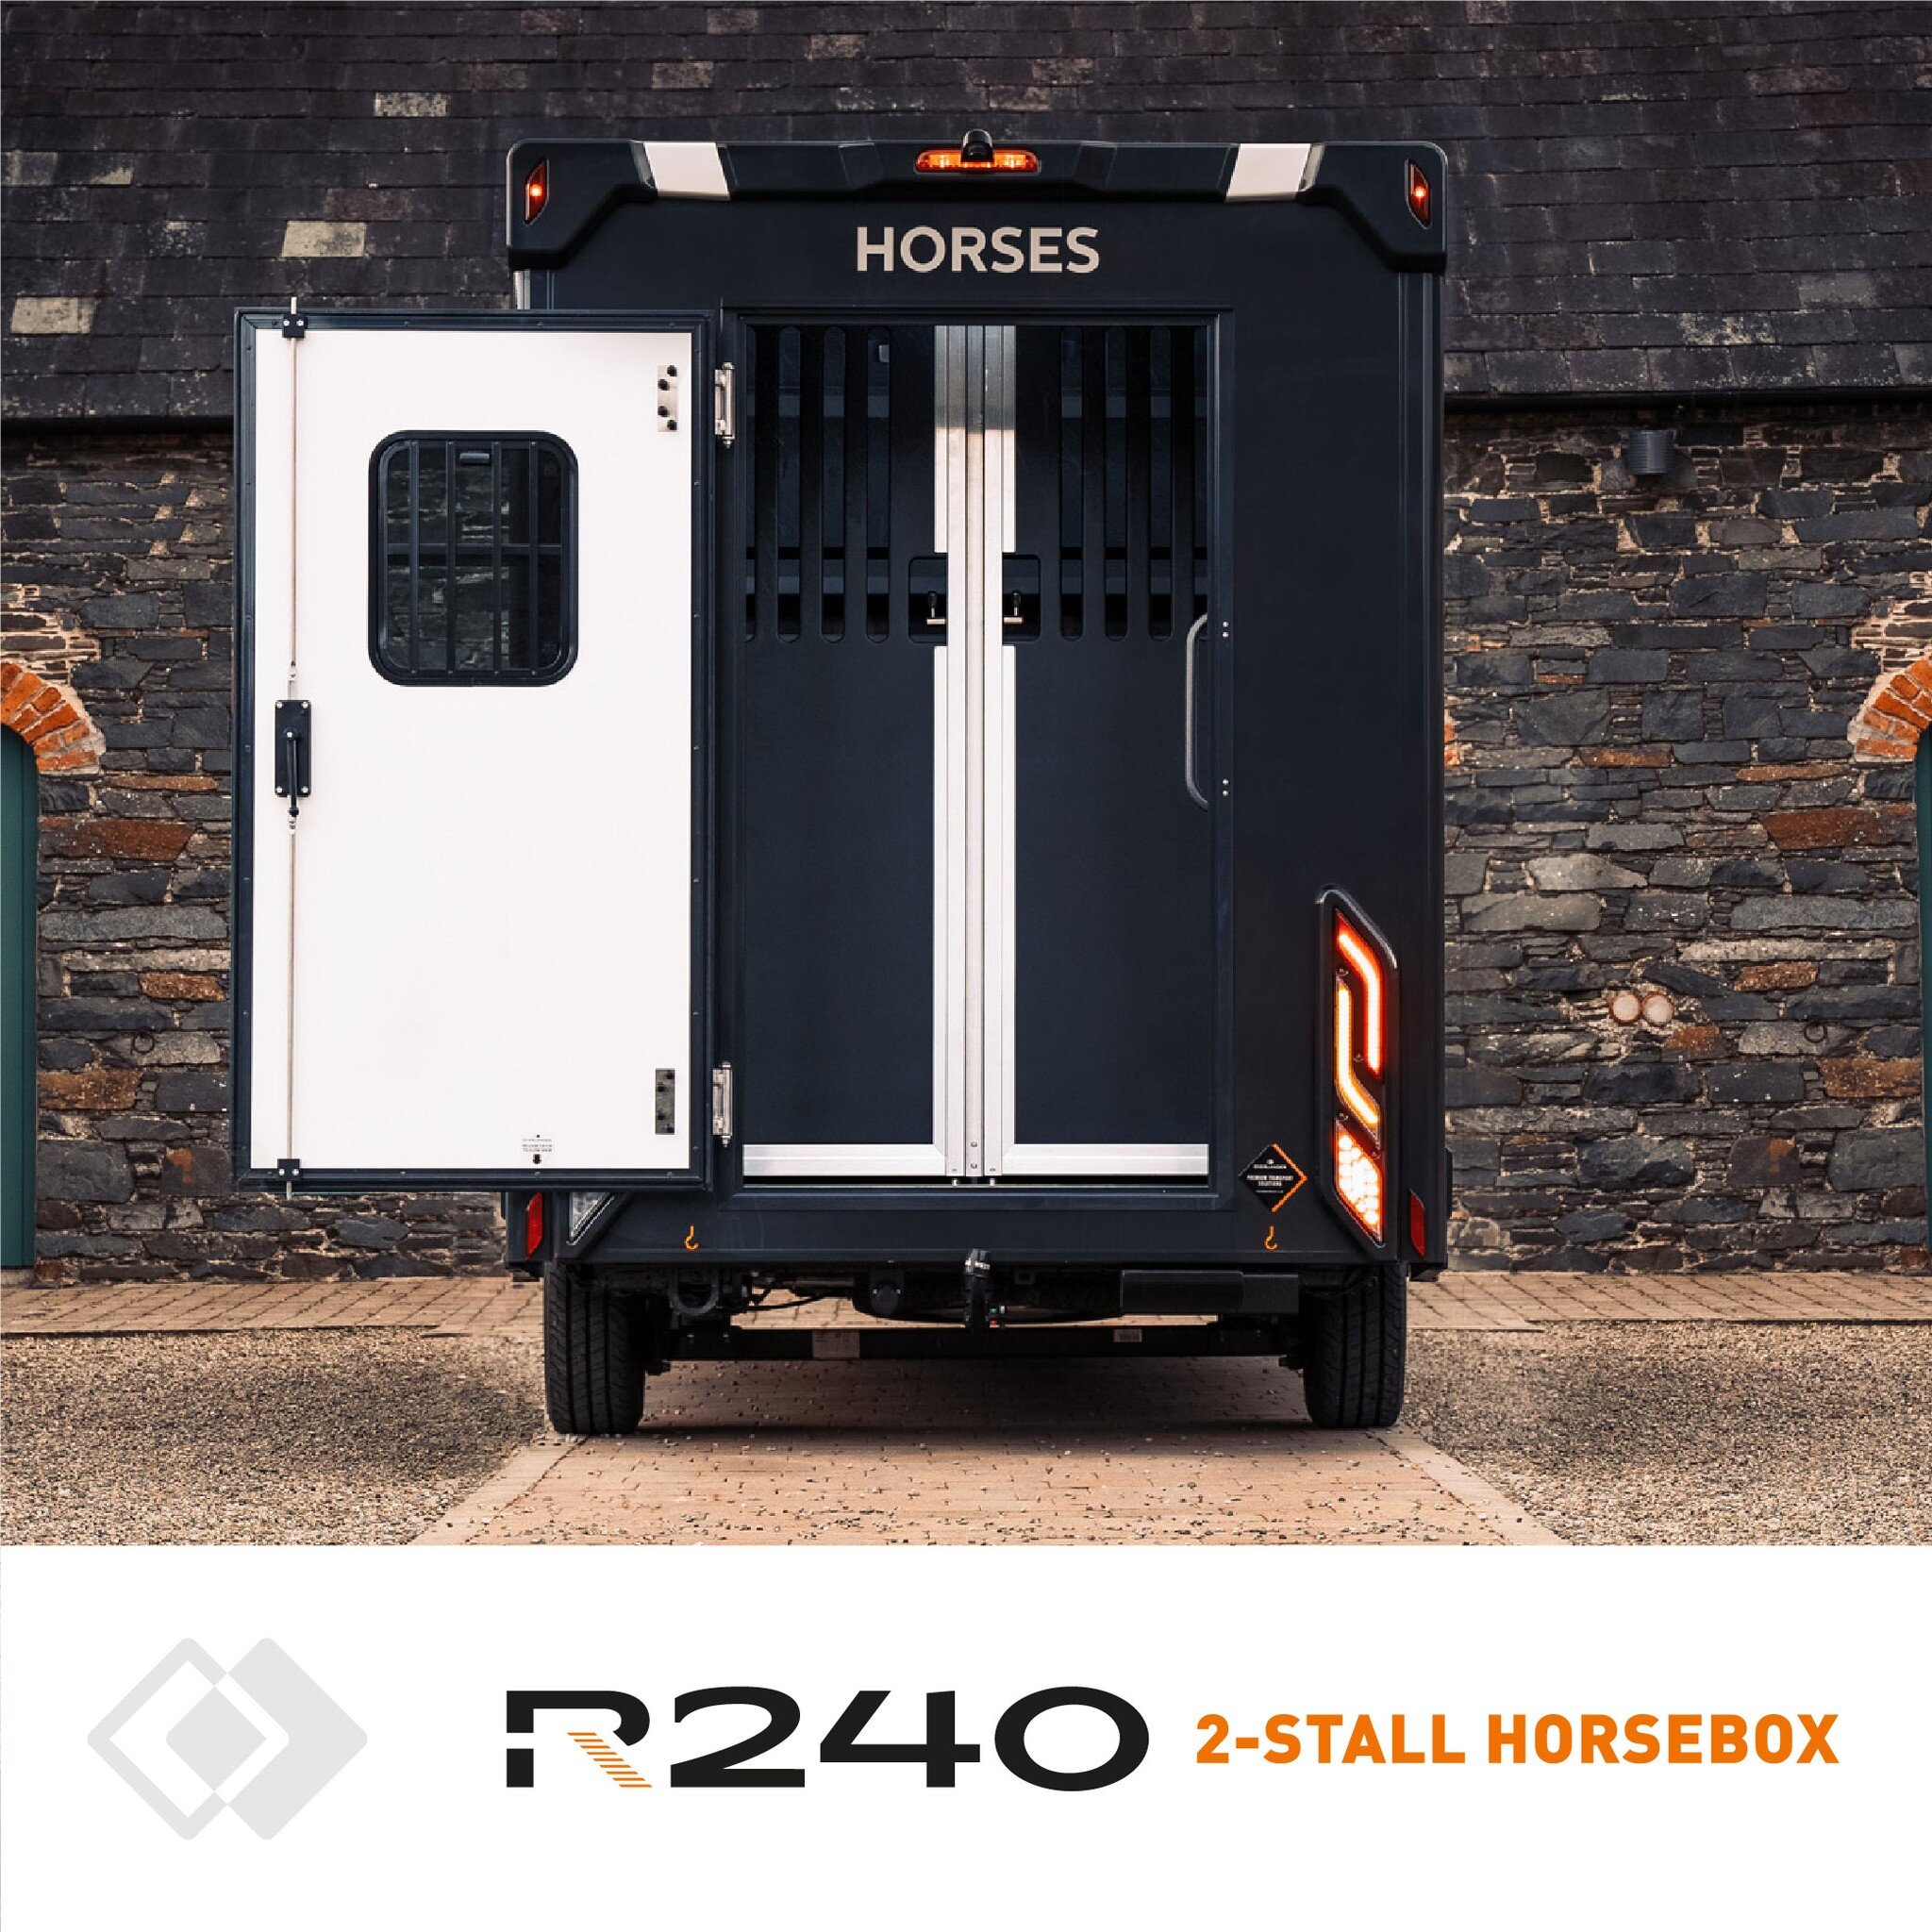 We have designed the R240 around the horse, with strength and safety being the paramount concern. 
Oversized rear door to allow for use in emergency scenarios, fitted with industrial hinges and positive hold back.
#overlander #builtbeyond #horsebox #